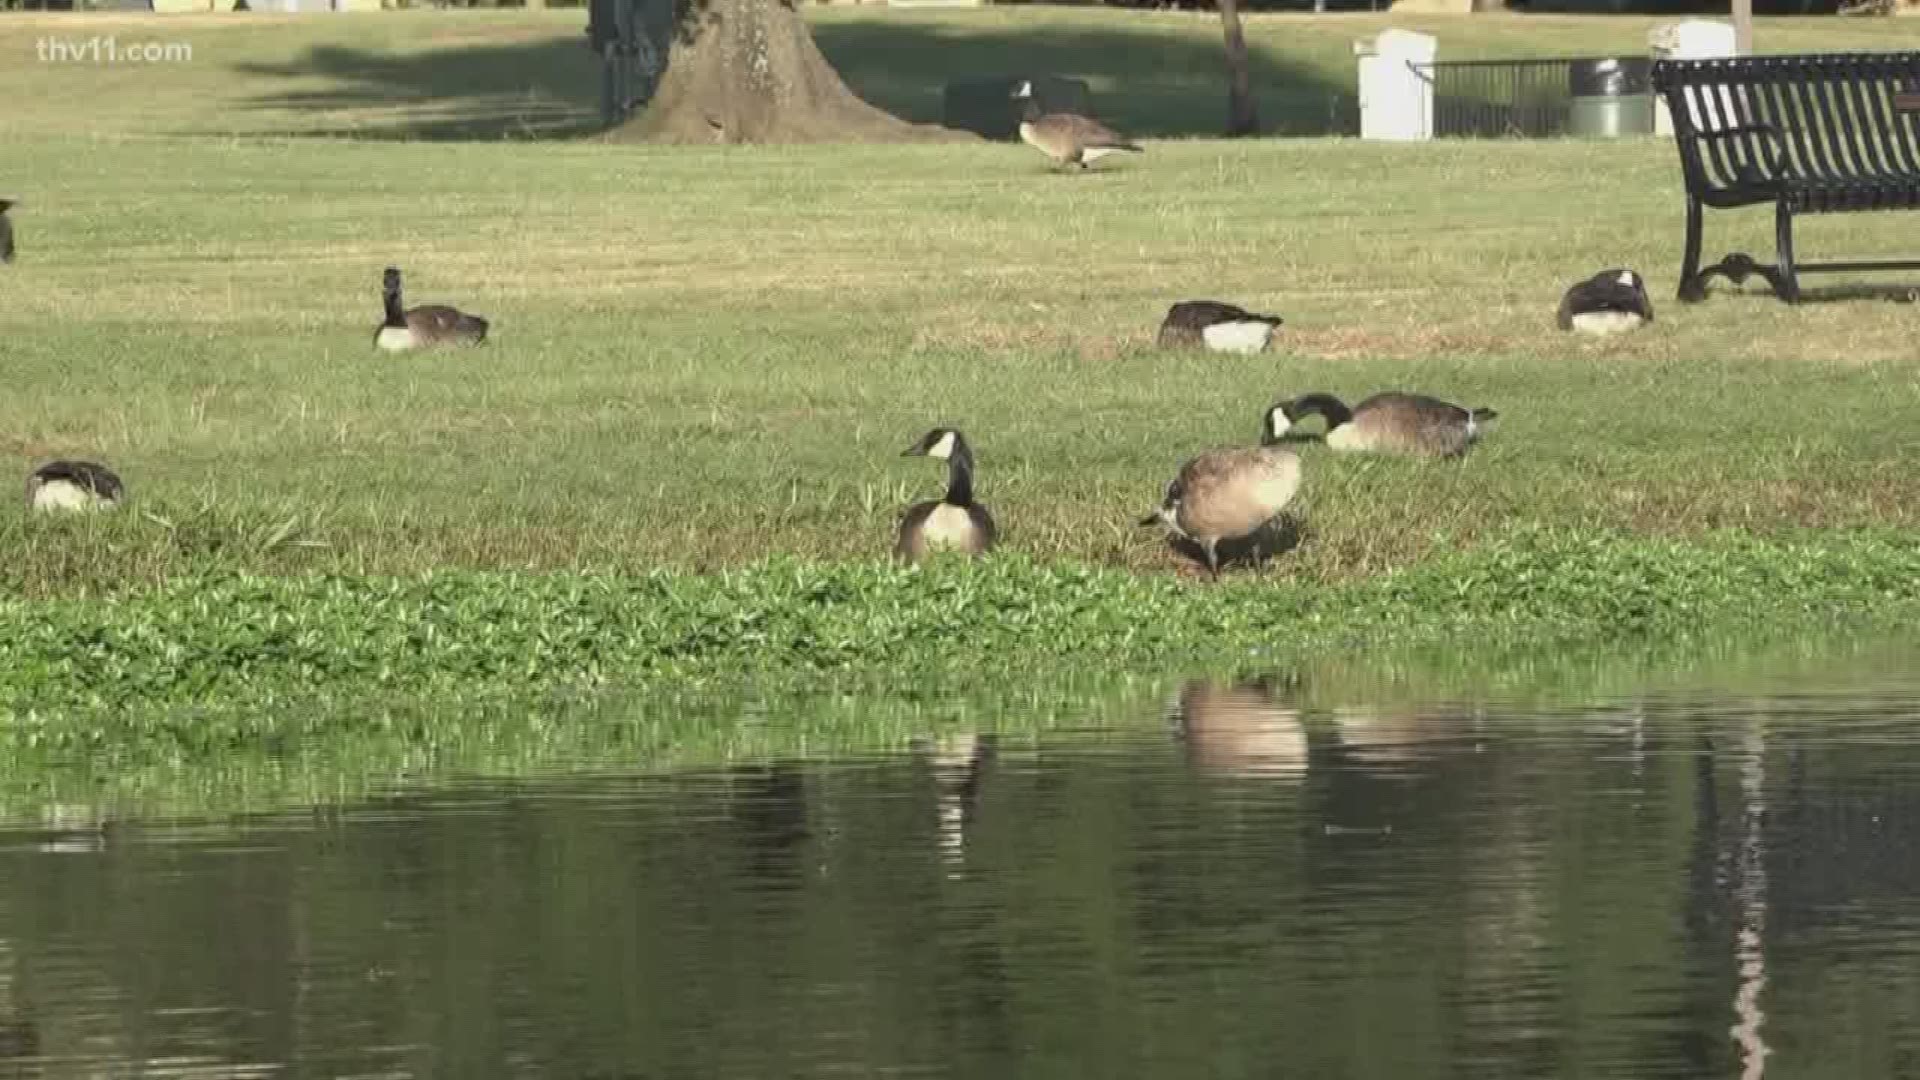 Recent headlines show geese are being killed by the thousands in cities that are overpopulated by the birds.